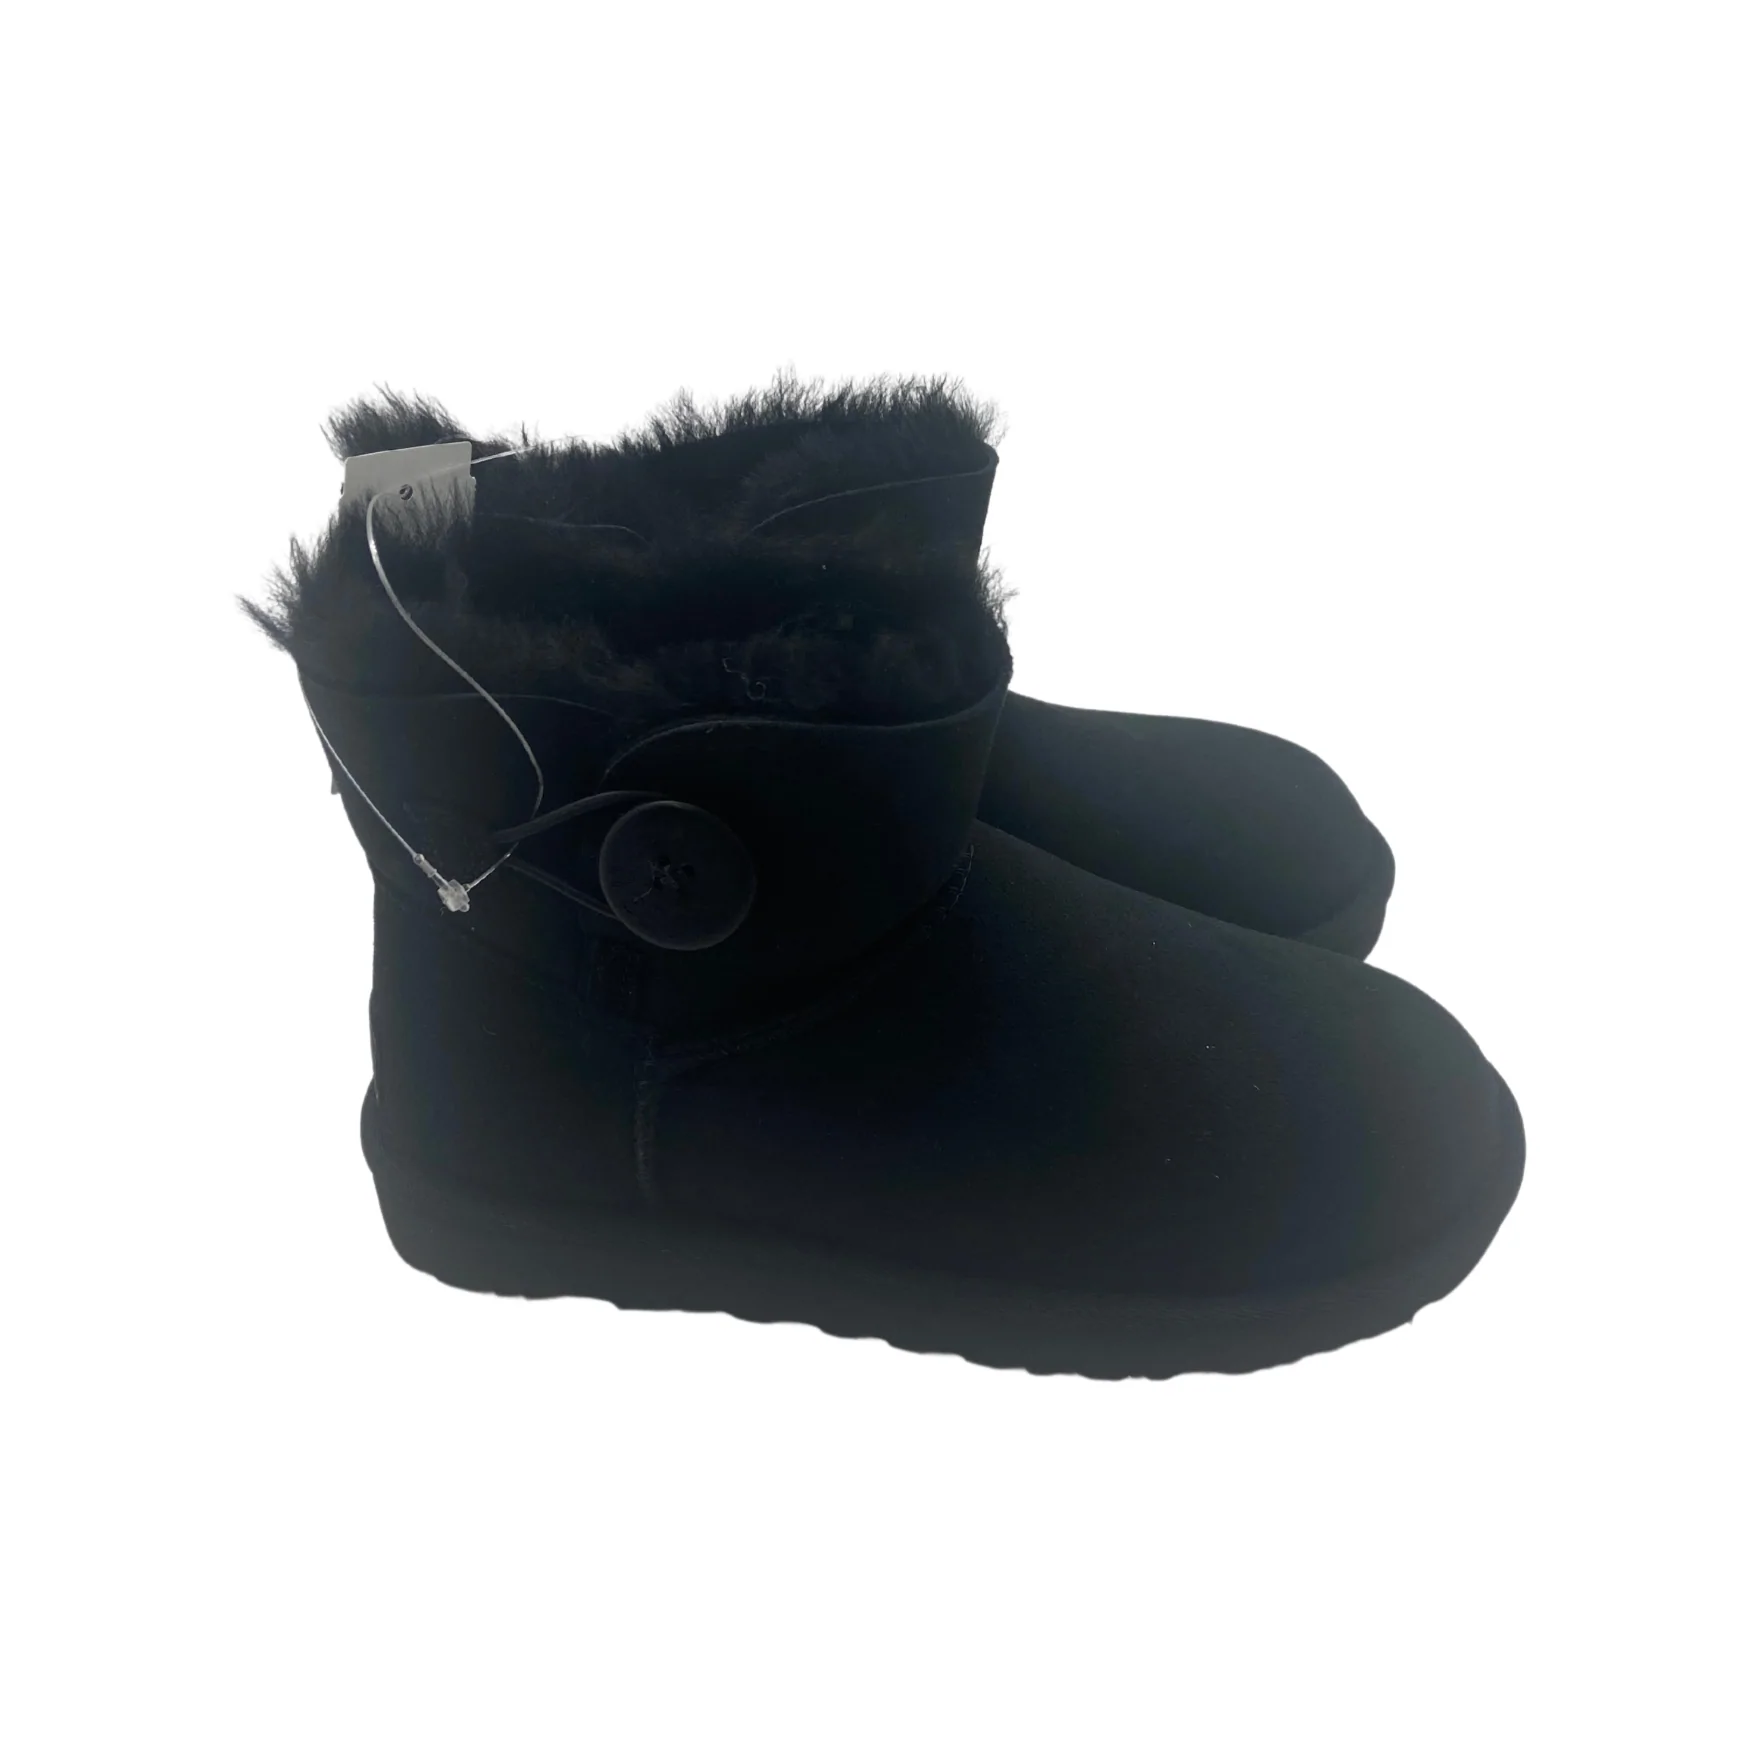 Ugg: Women's Boots / Winter Boots / Mini Bailey Button II / Black / Size 6